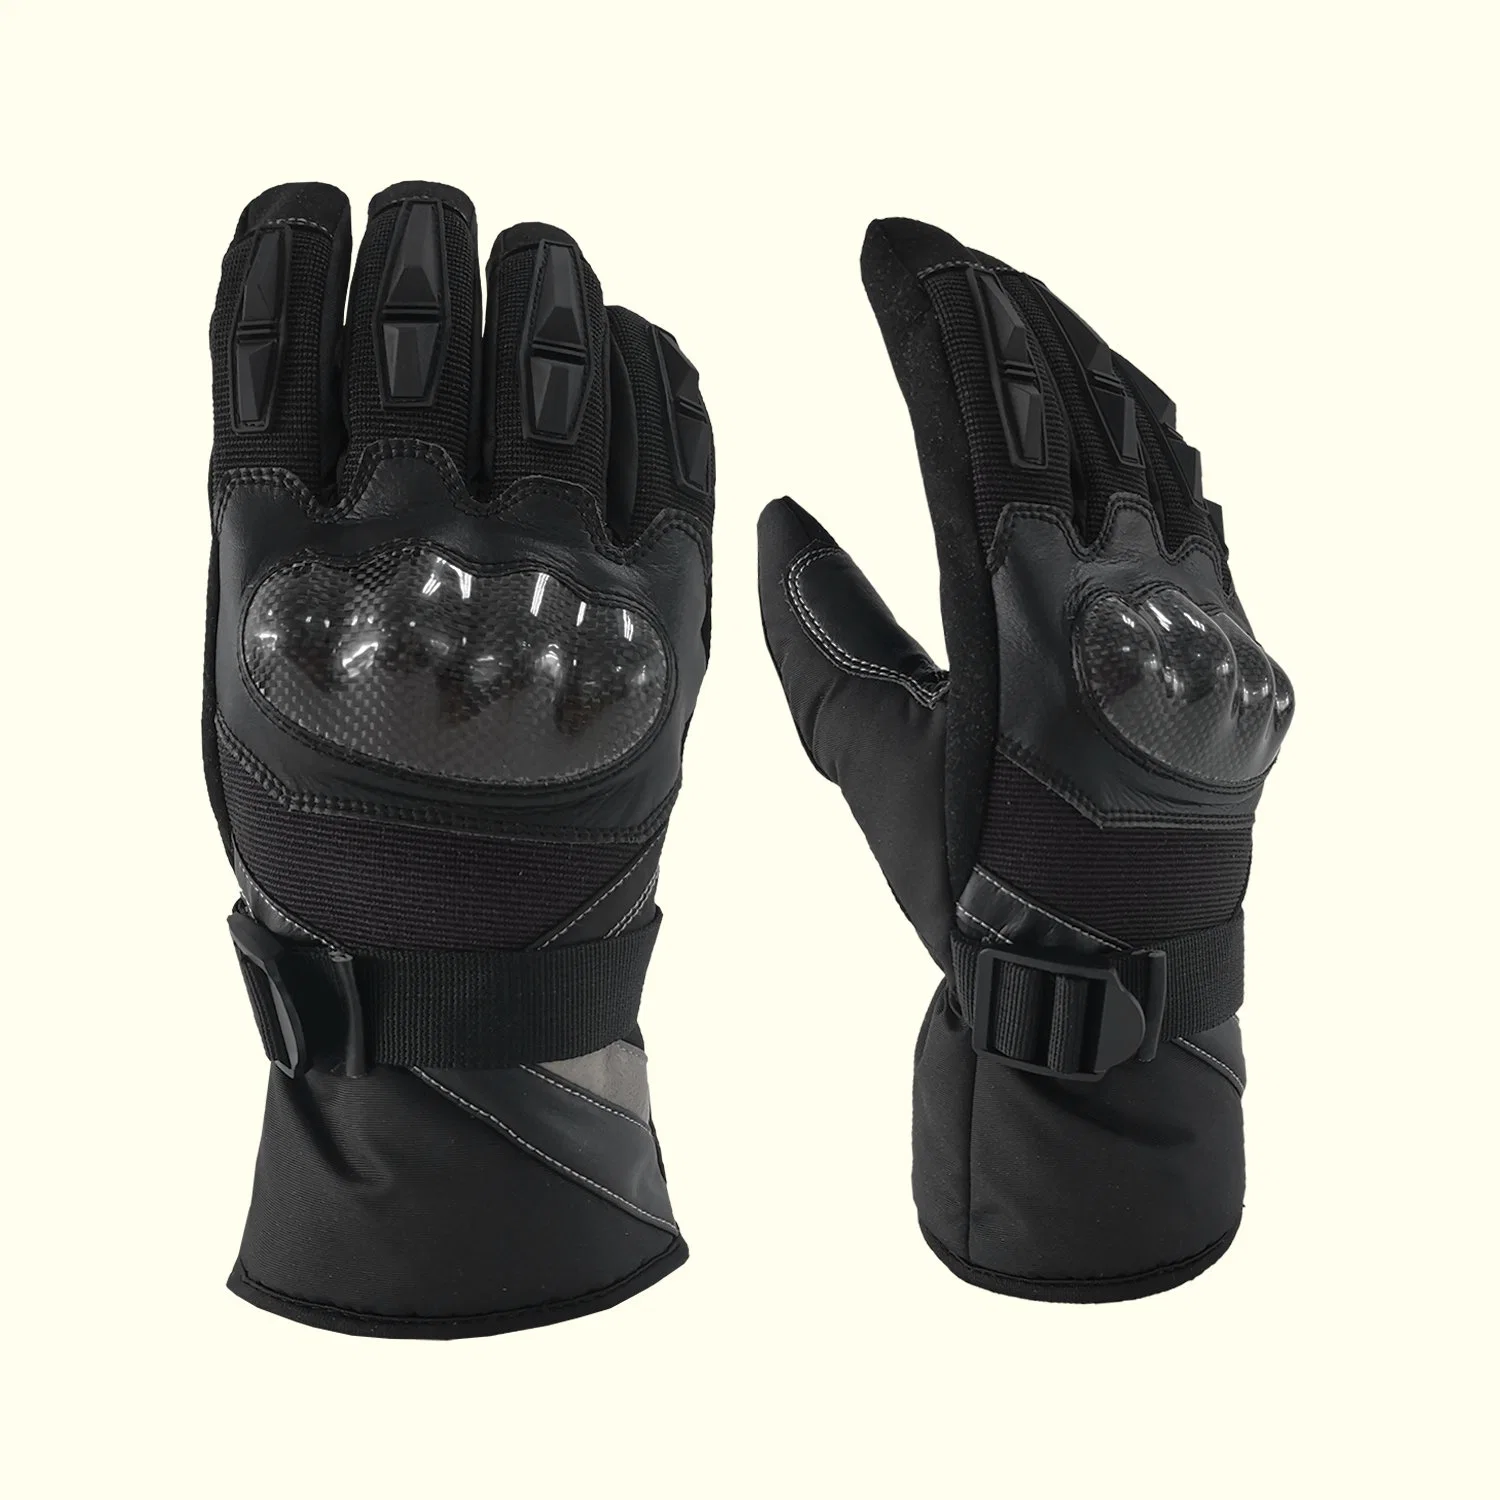 Winter Warm Outdoor Sport Motorcycling Racing Gloves Impact Protection Water-Proof